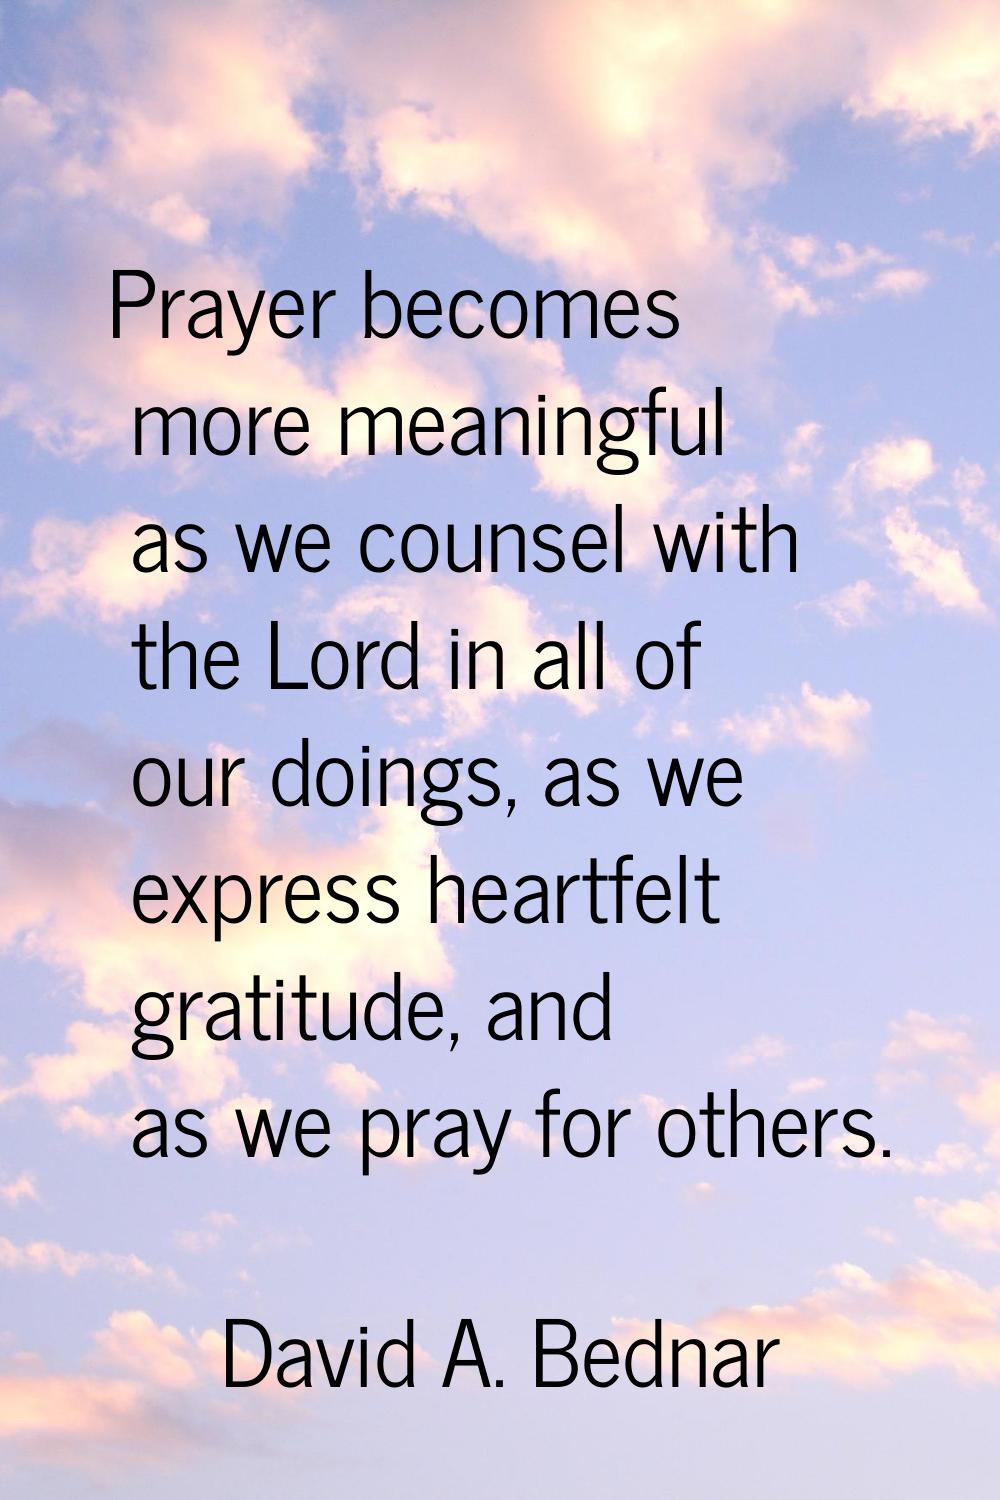 Prayer becomes more meaningful as we counsel with the Lord in all of our doings, as we express hear